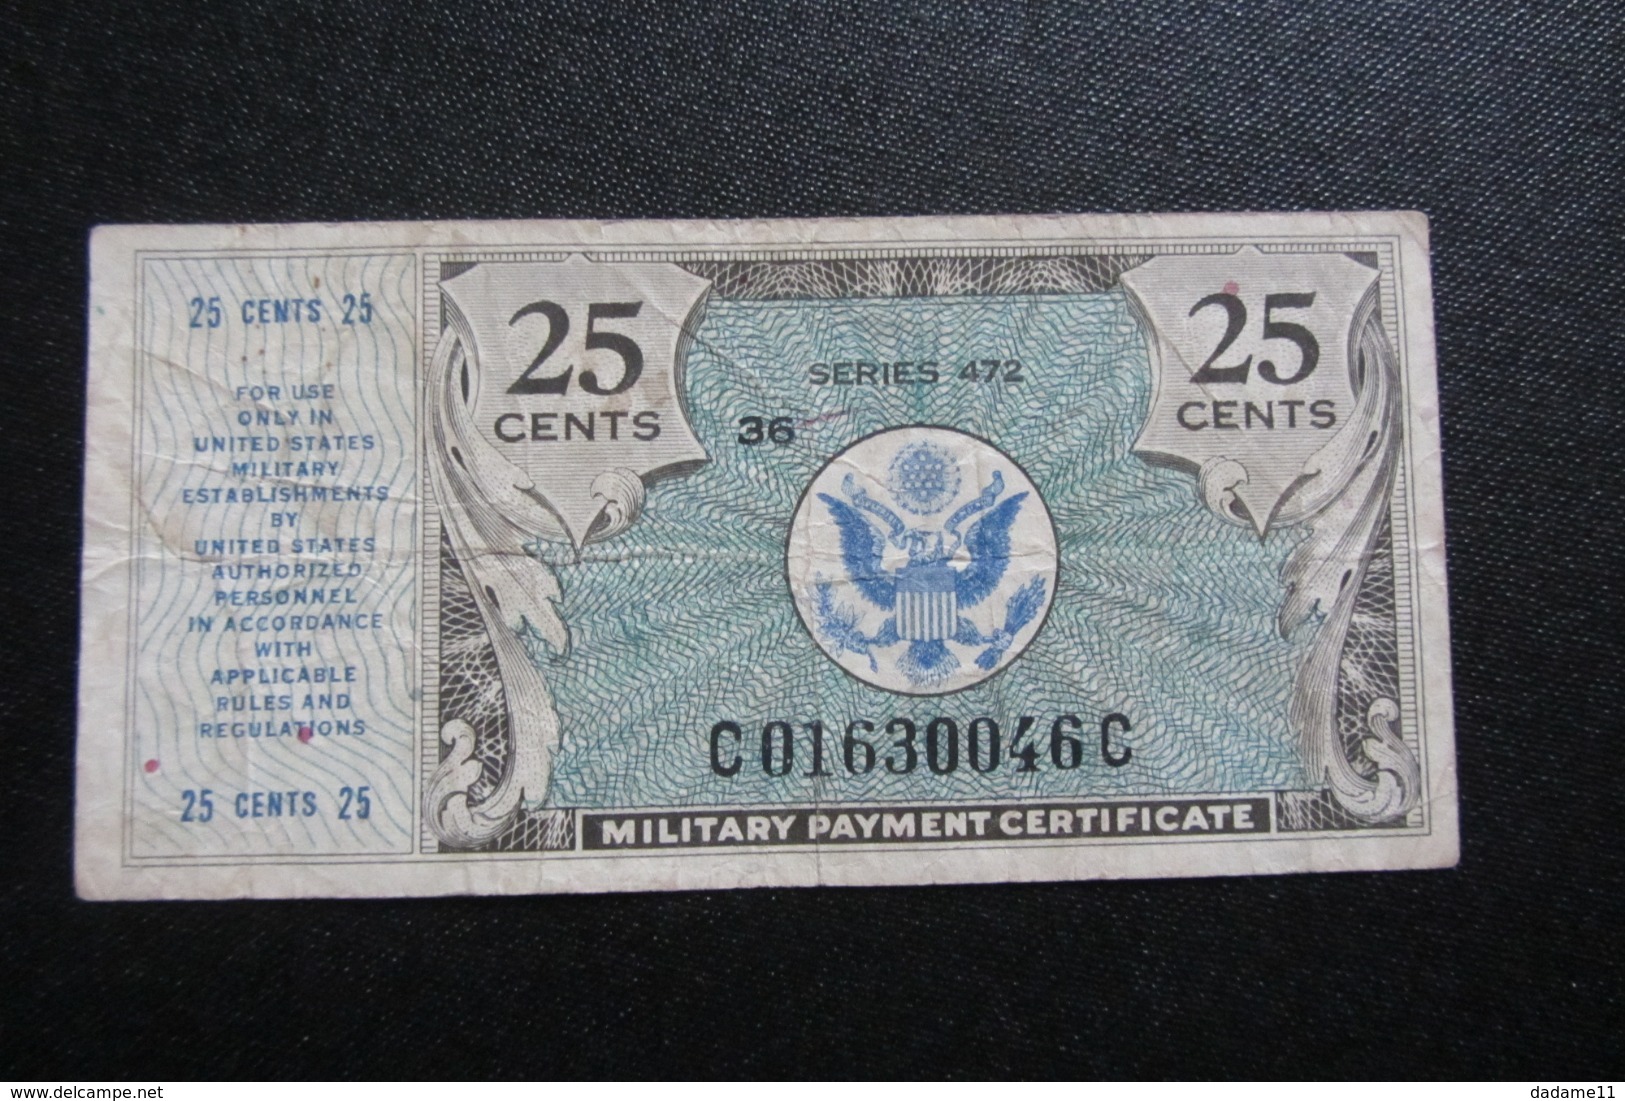 25 Cents Military Payement - A Identifier